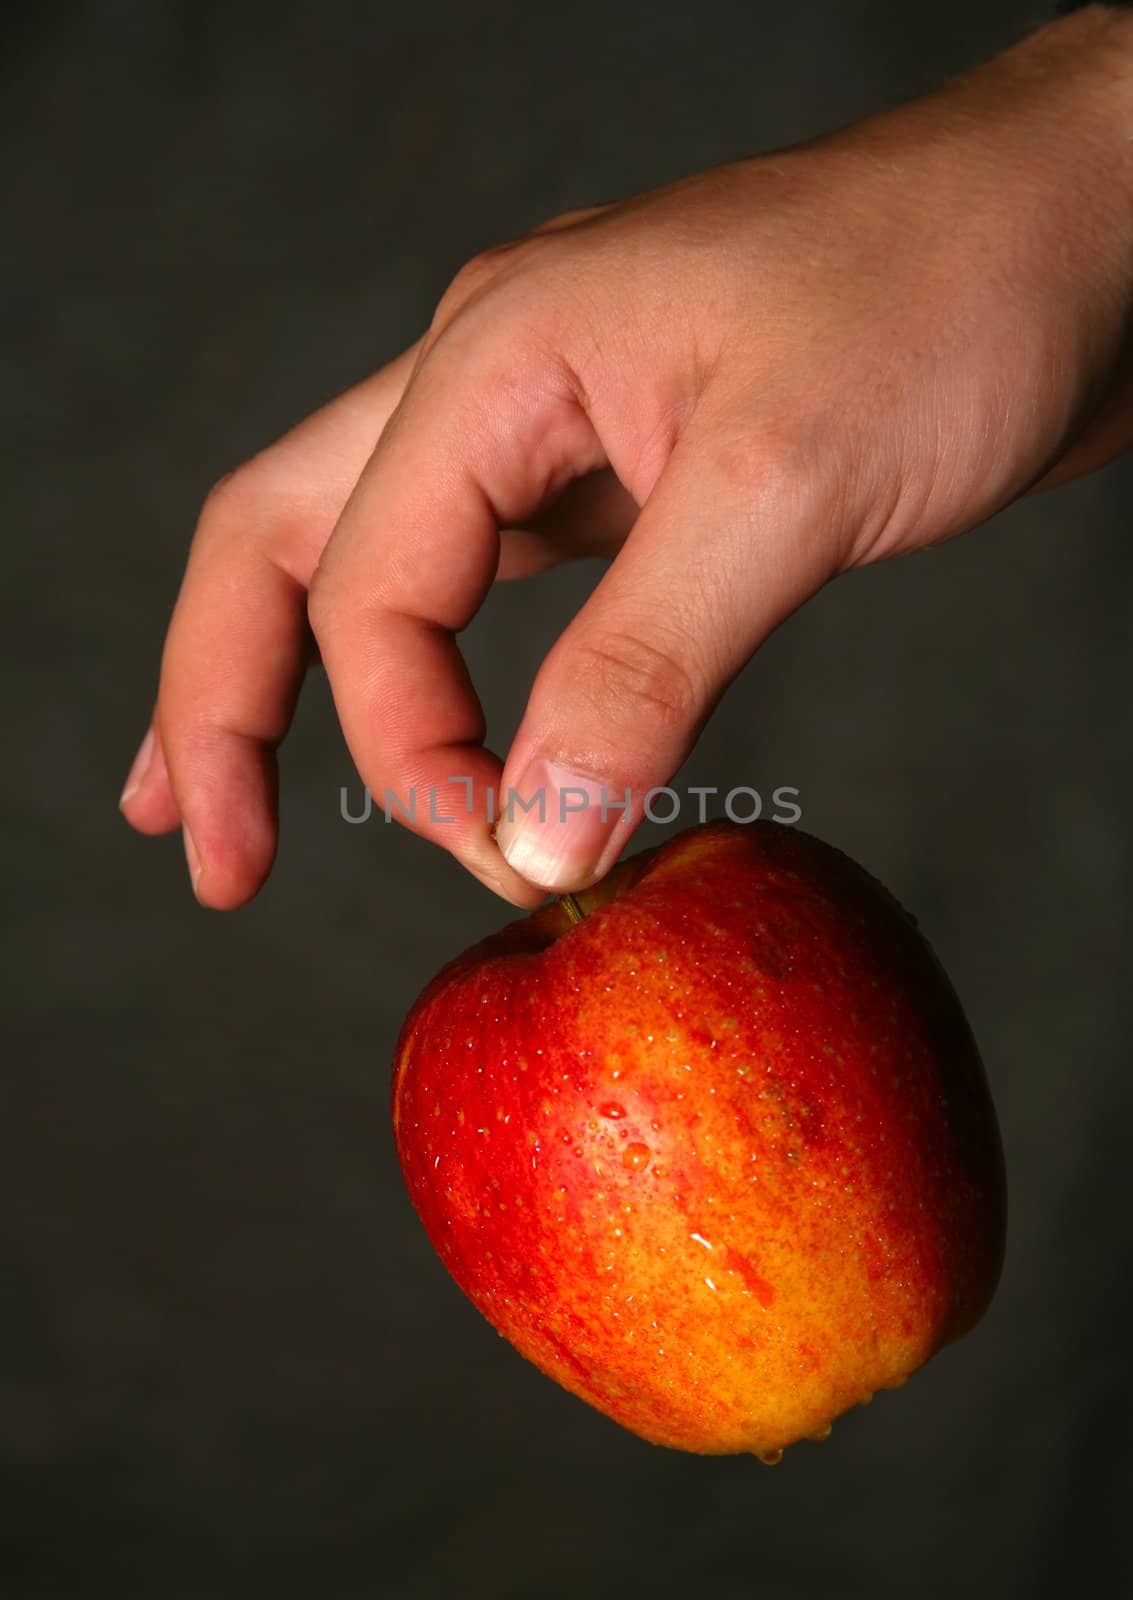 Man's hand with a red apple on a dark background